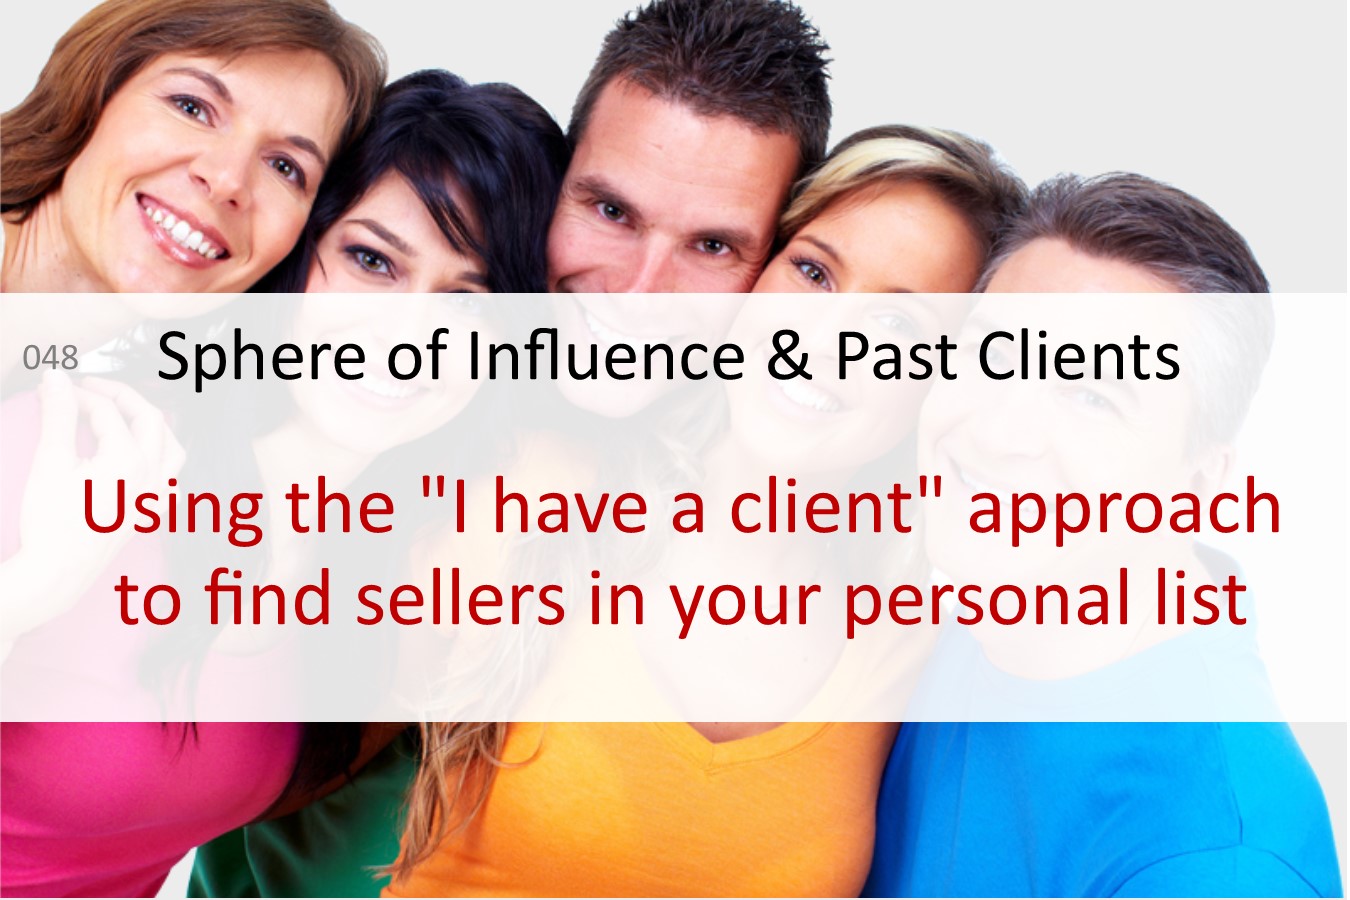 sphere of influence past clients seller leads postcards